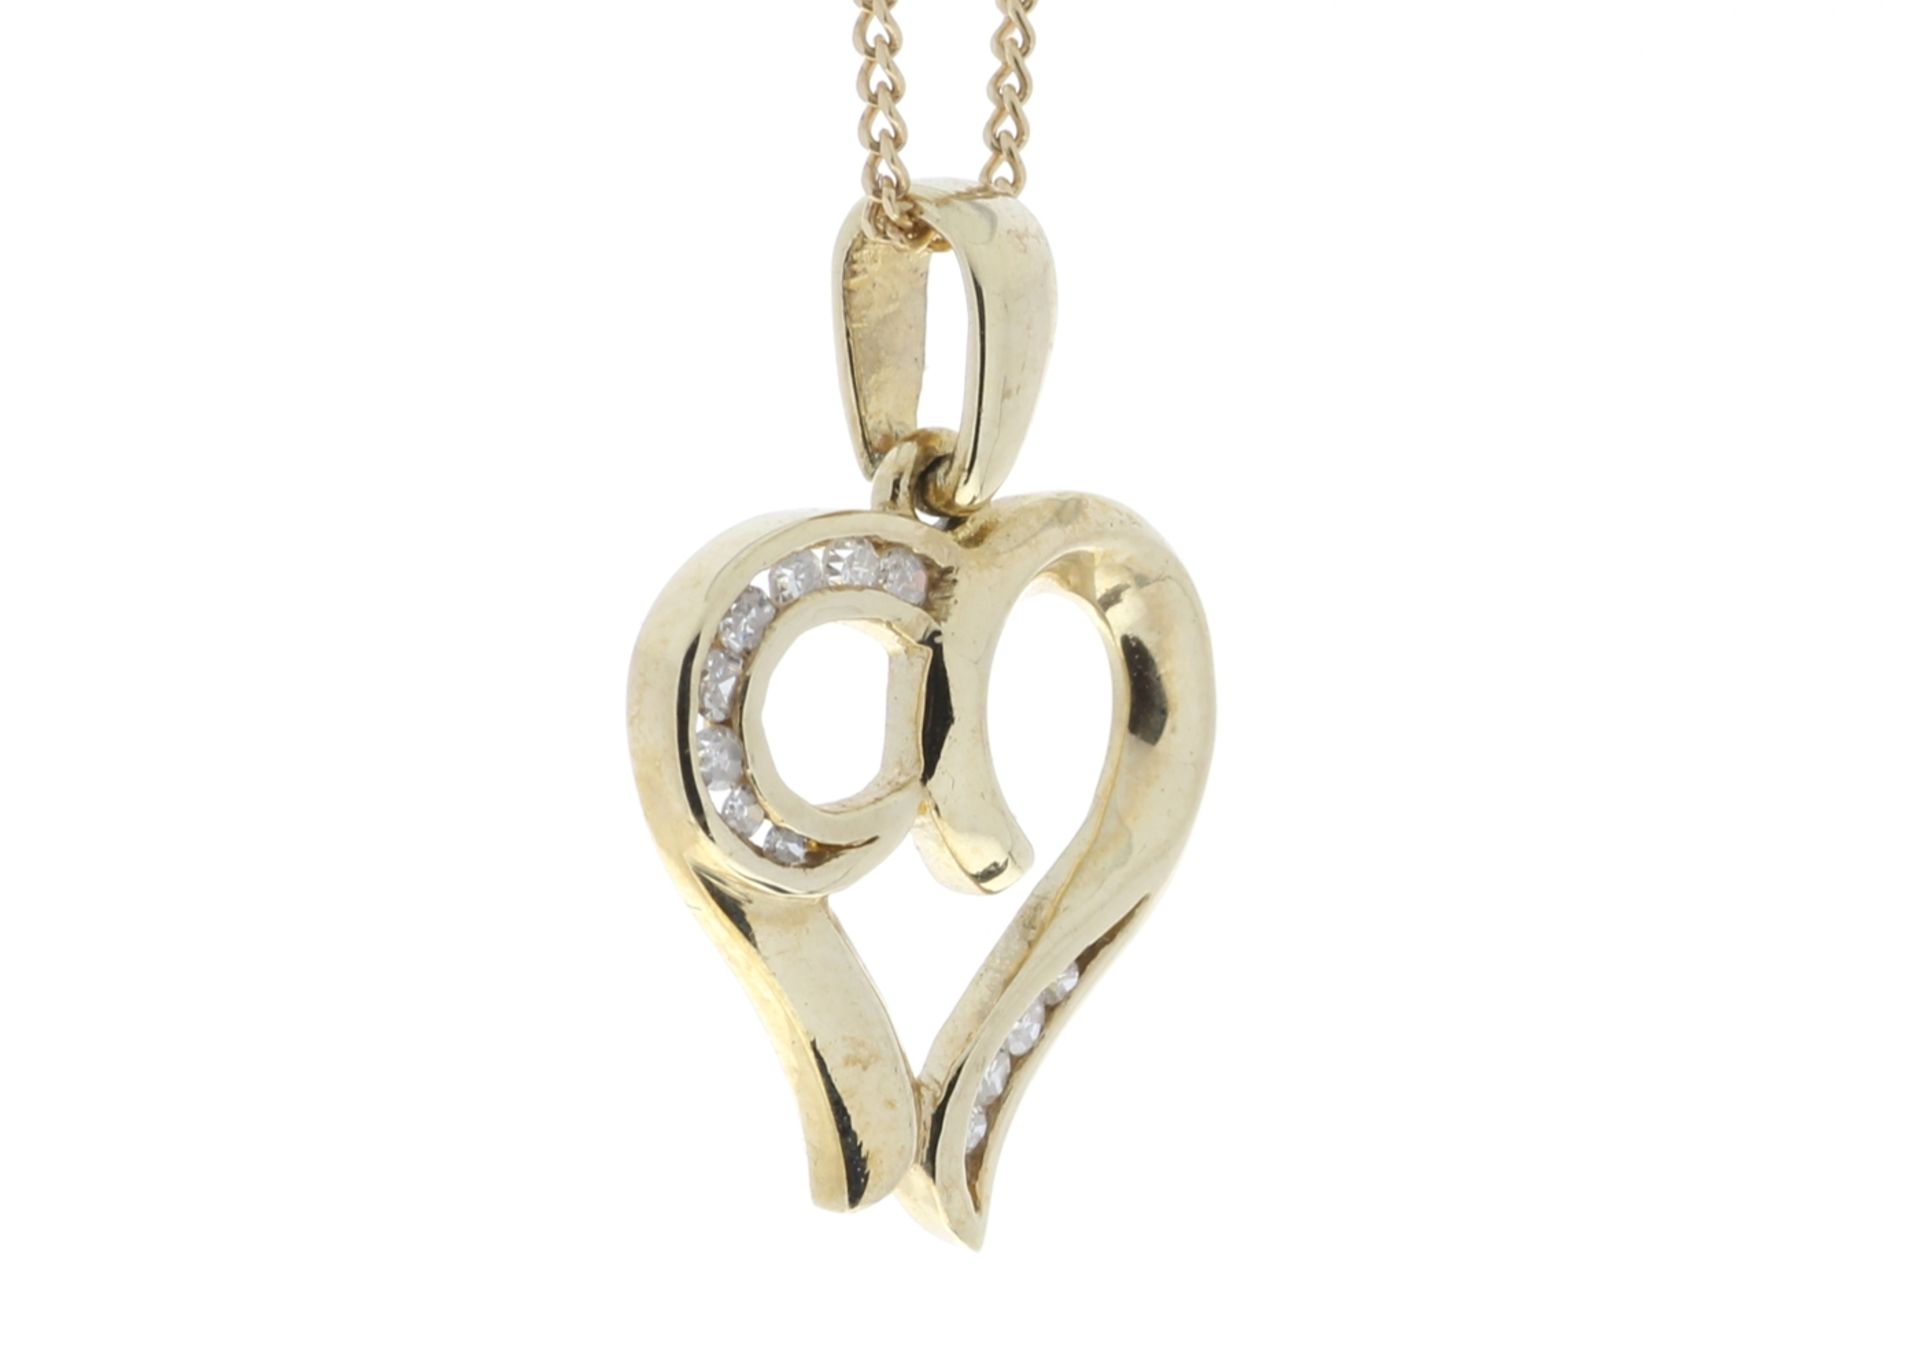 9ct Yellow Gold Heart Pendant with Diamonds in Top & Bottom Cormer Swirls 0.10 Carats - Image 2 of 4